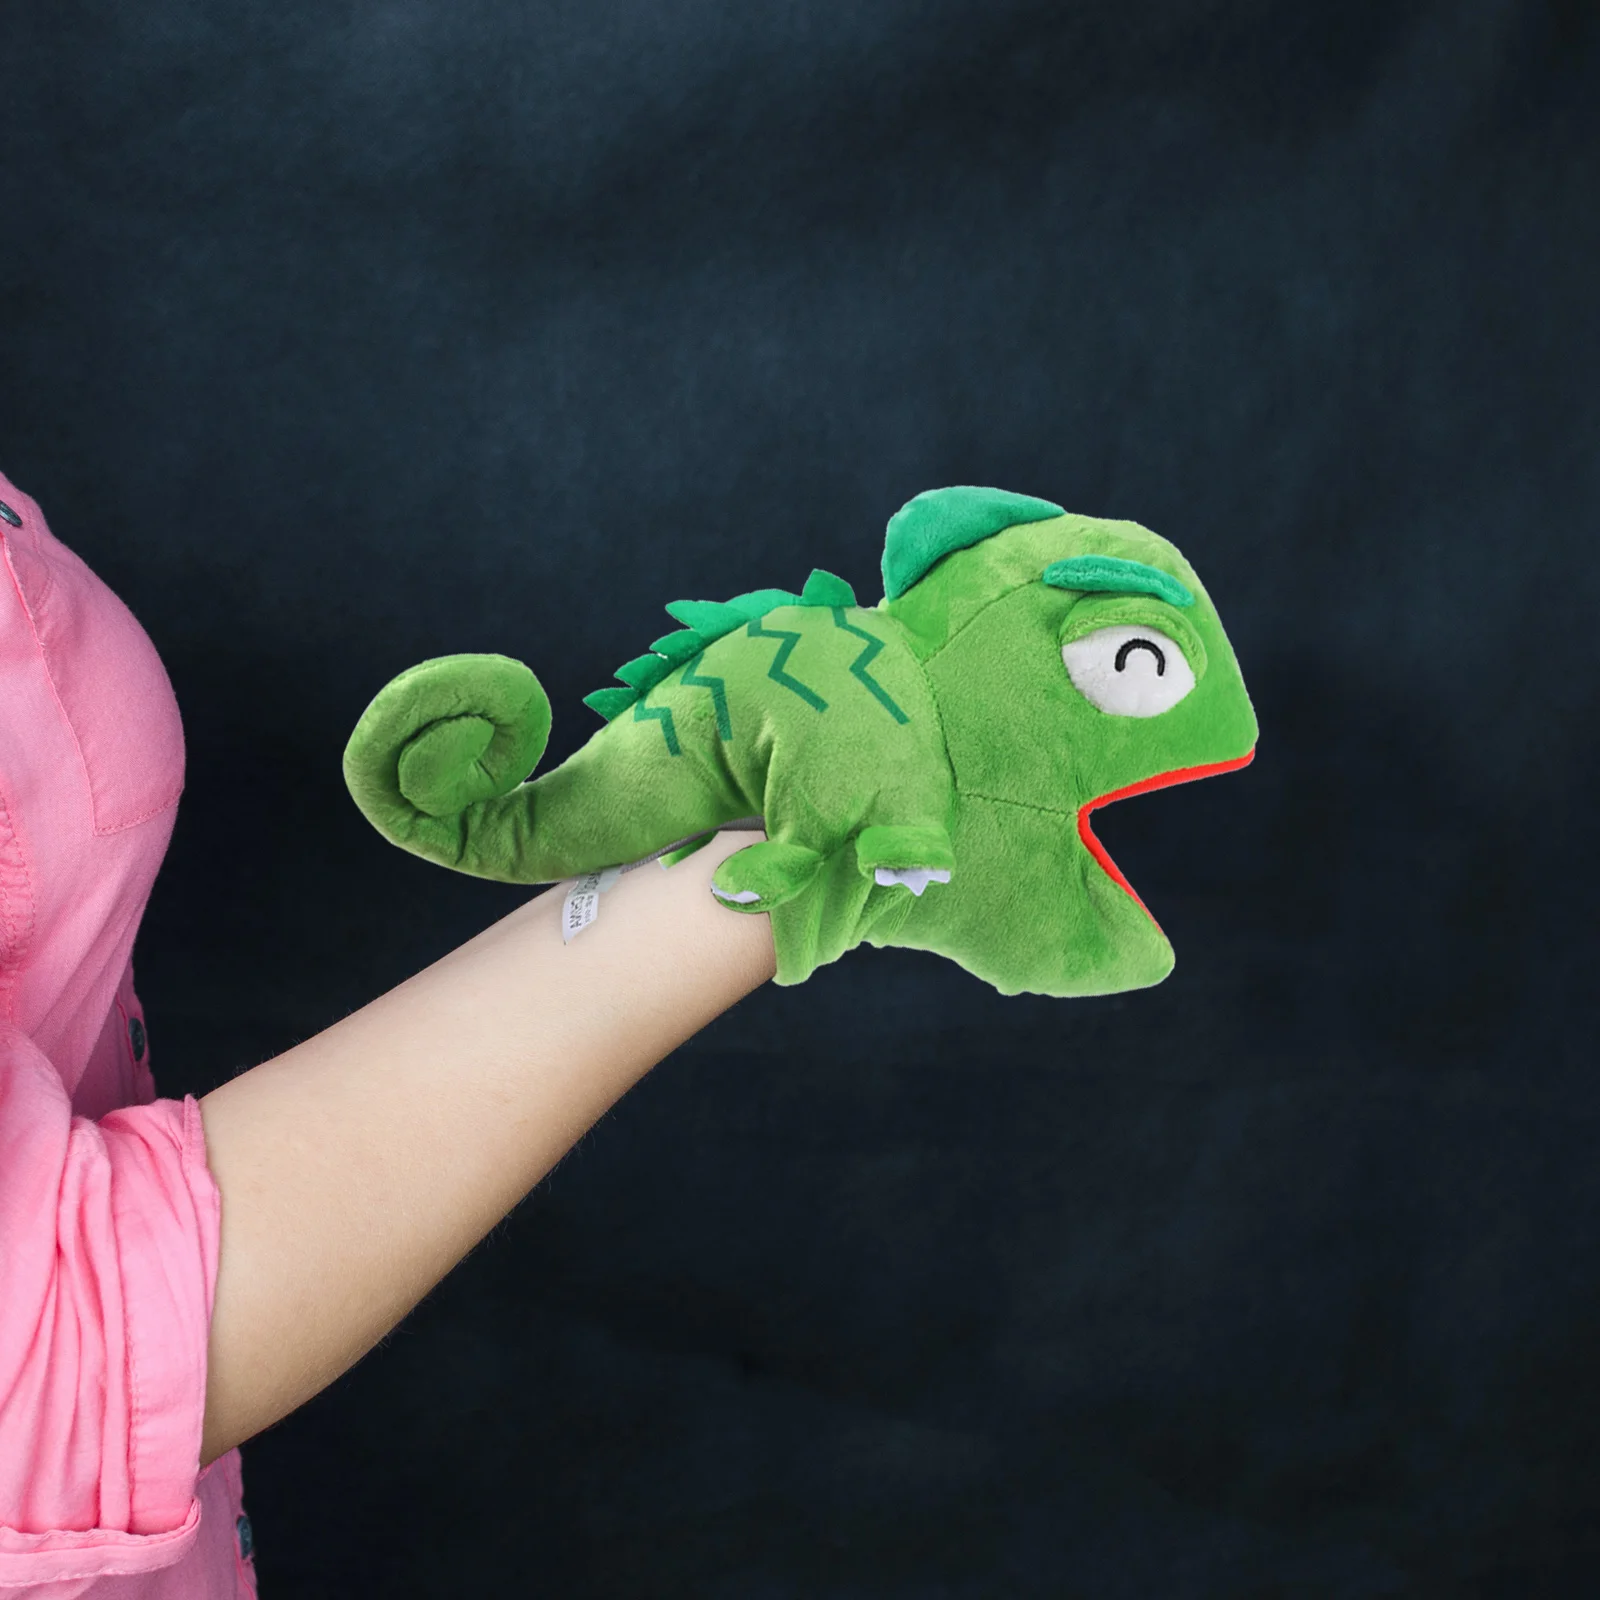 Funny Lizard Hand Puppet Plush Reptile Animal Hand Puppet Toy Toddler Kids Gift